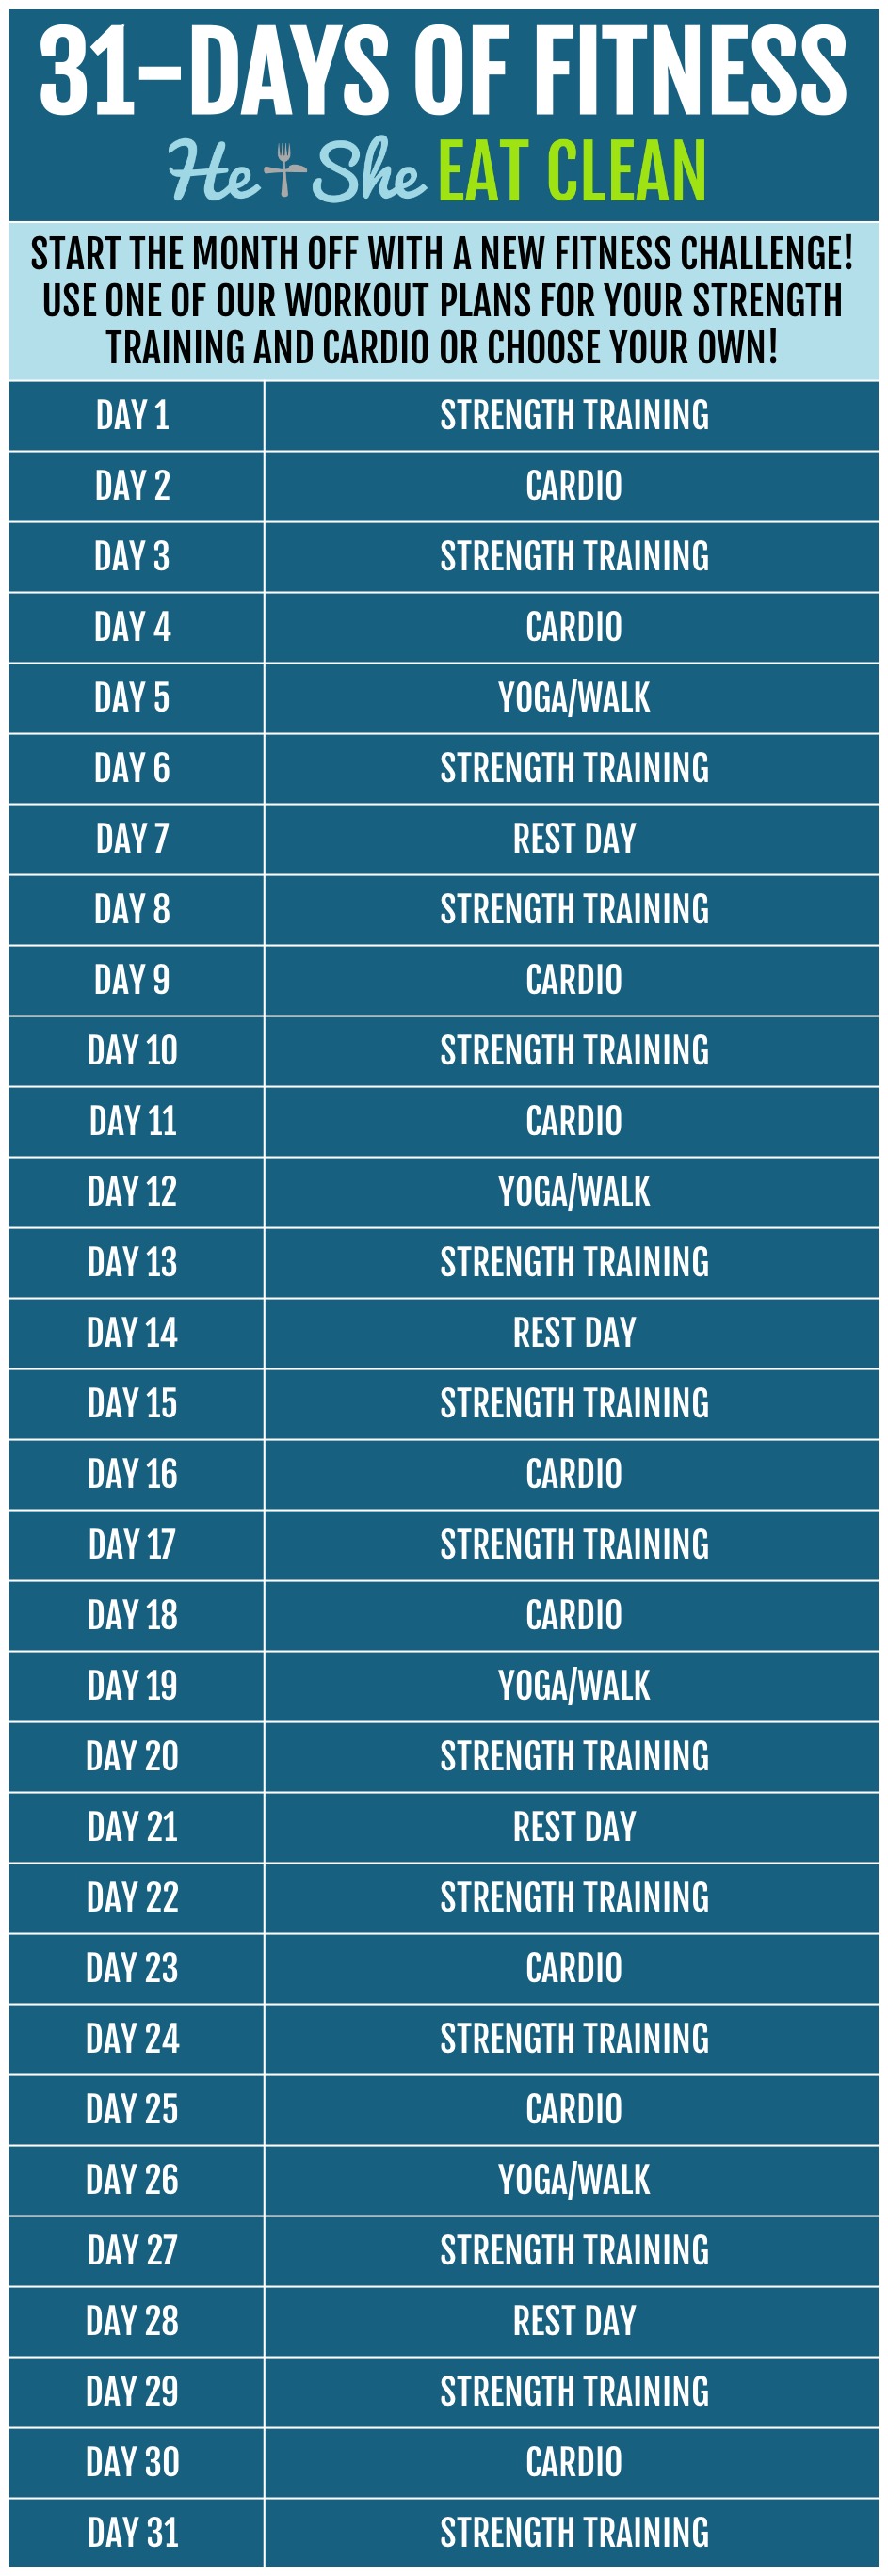 31 Days of Fitness